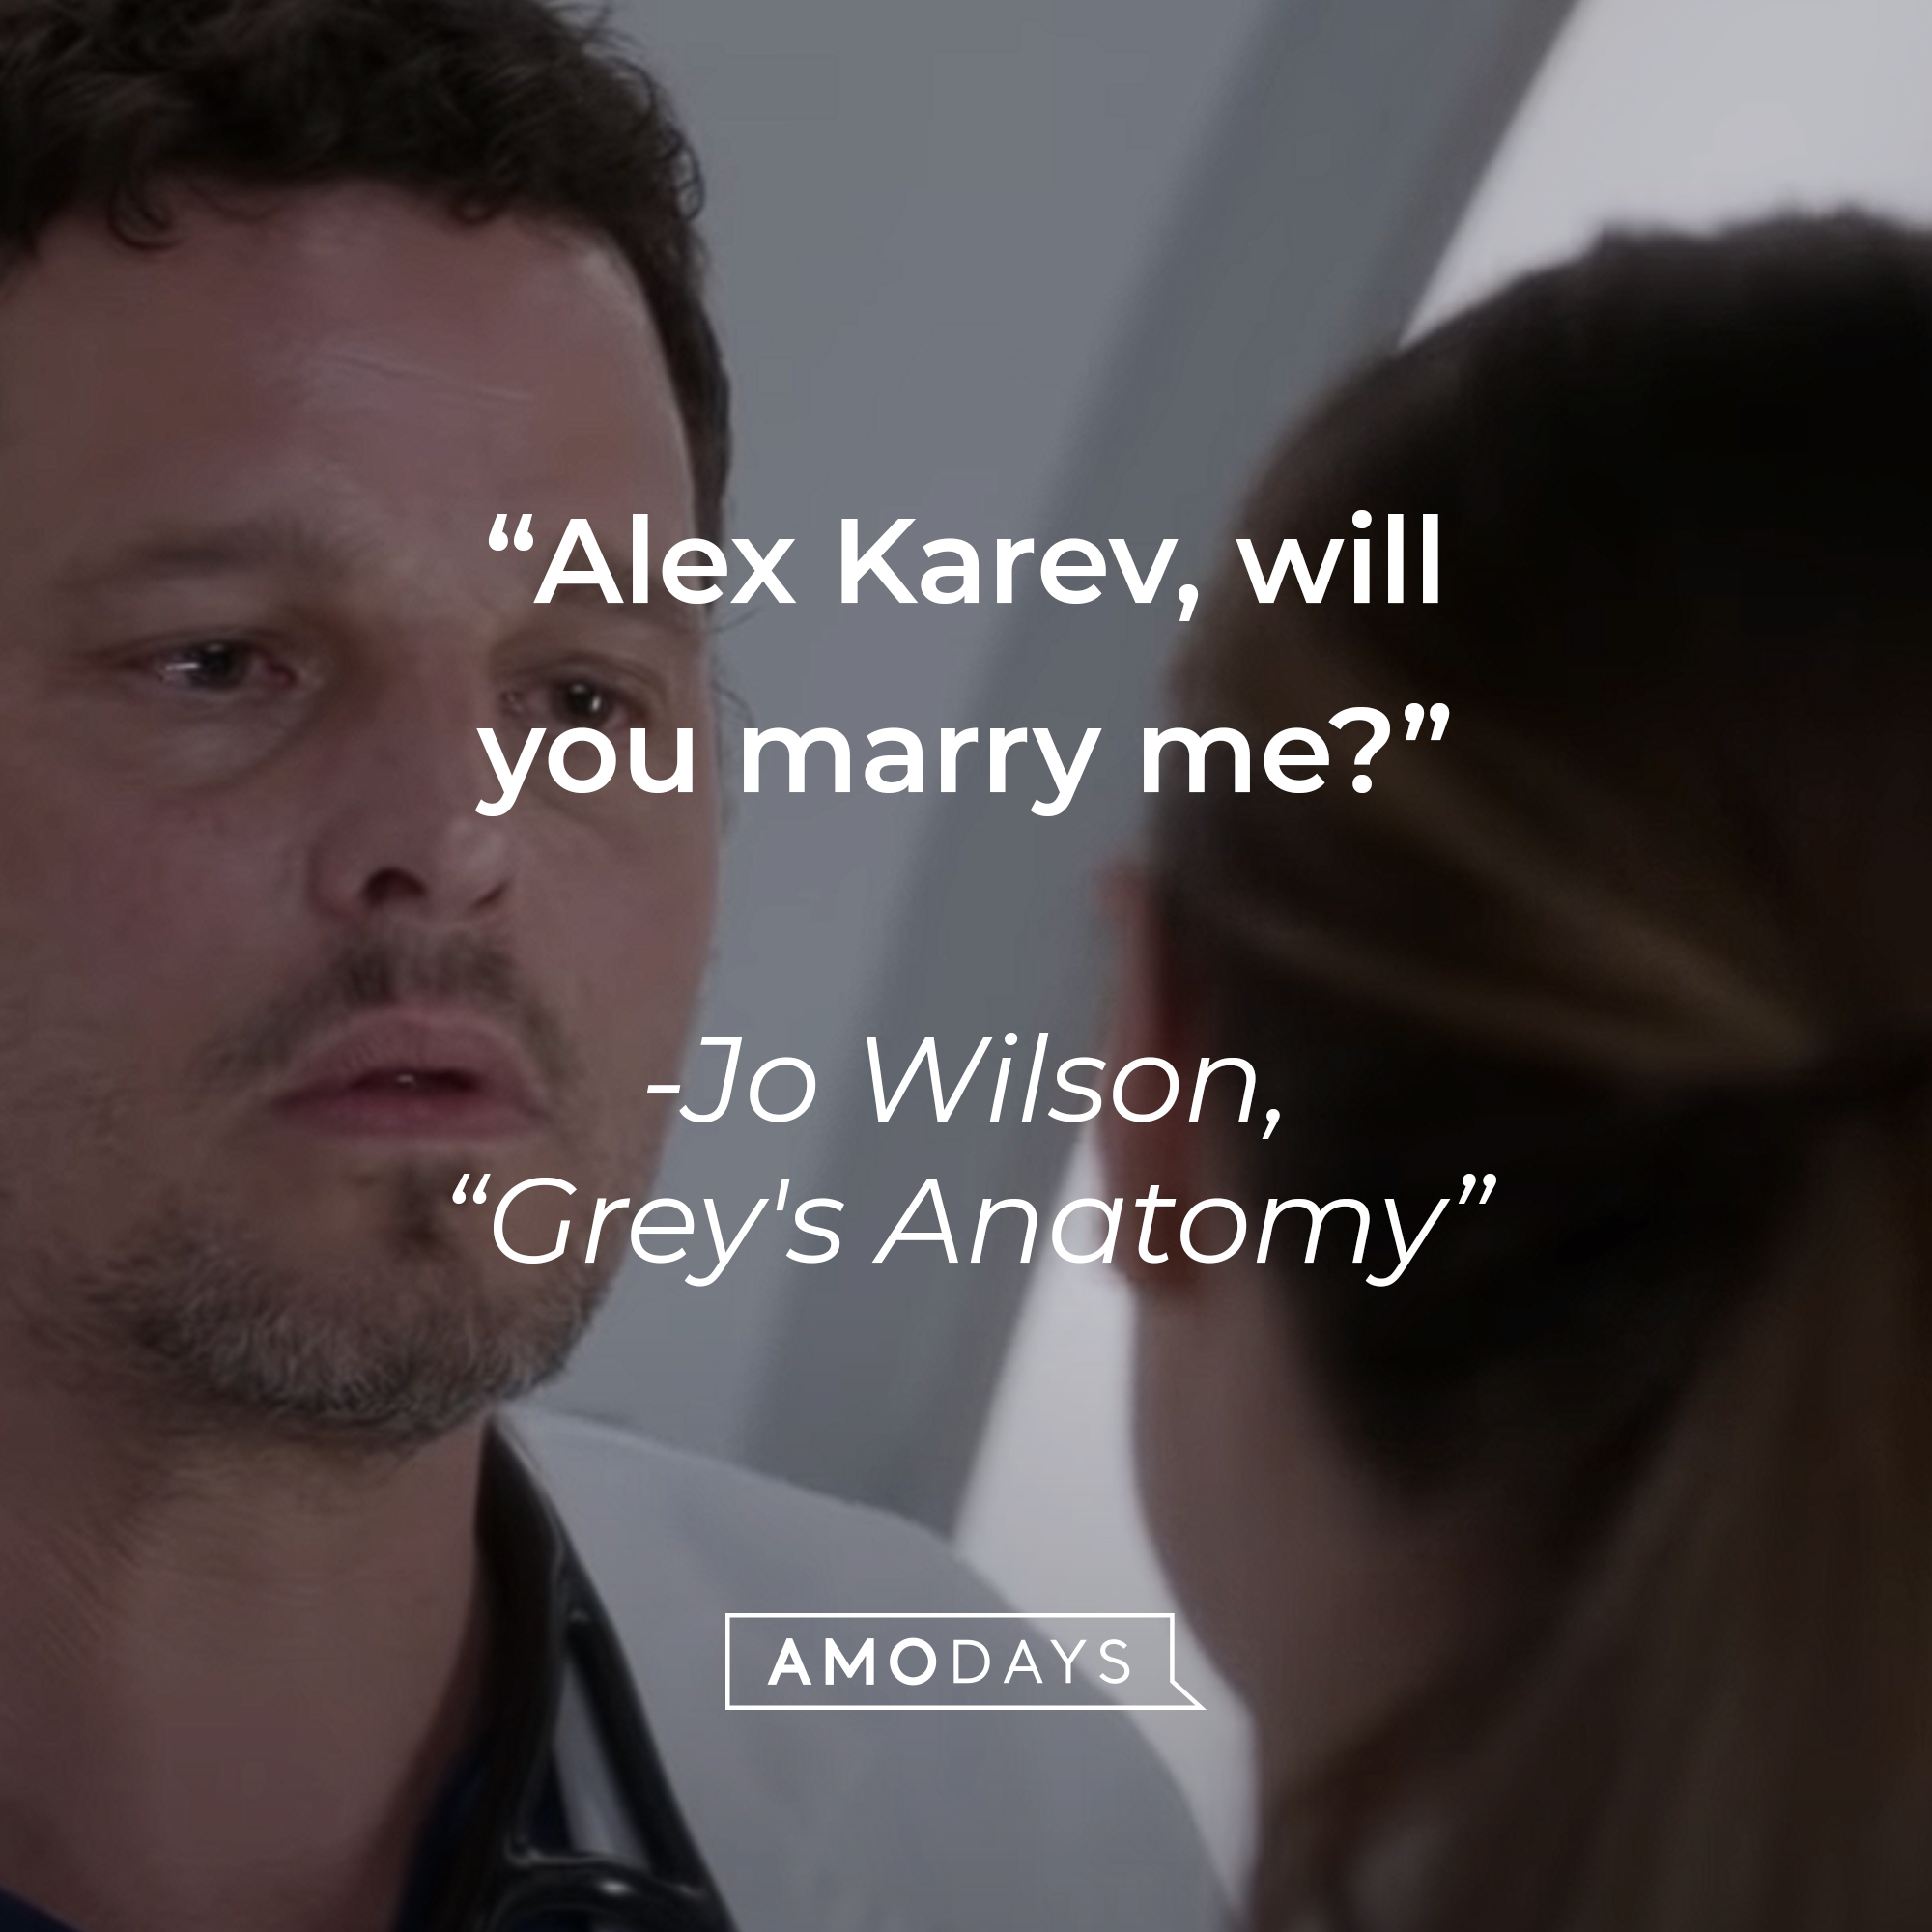 Jo Wilson’s quote from “Grey’s Anatomy”: “Alex Karev, will you marry me?” | Source: youtube.com/ABCNetwork